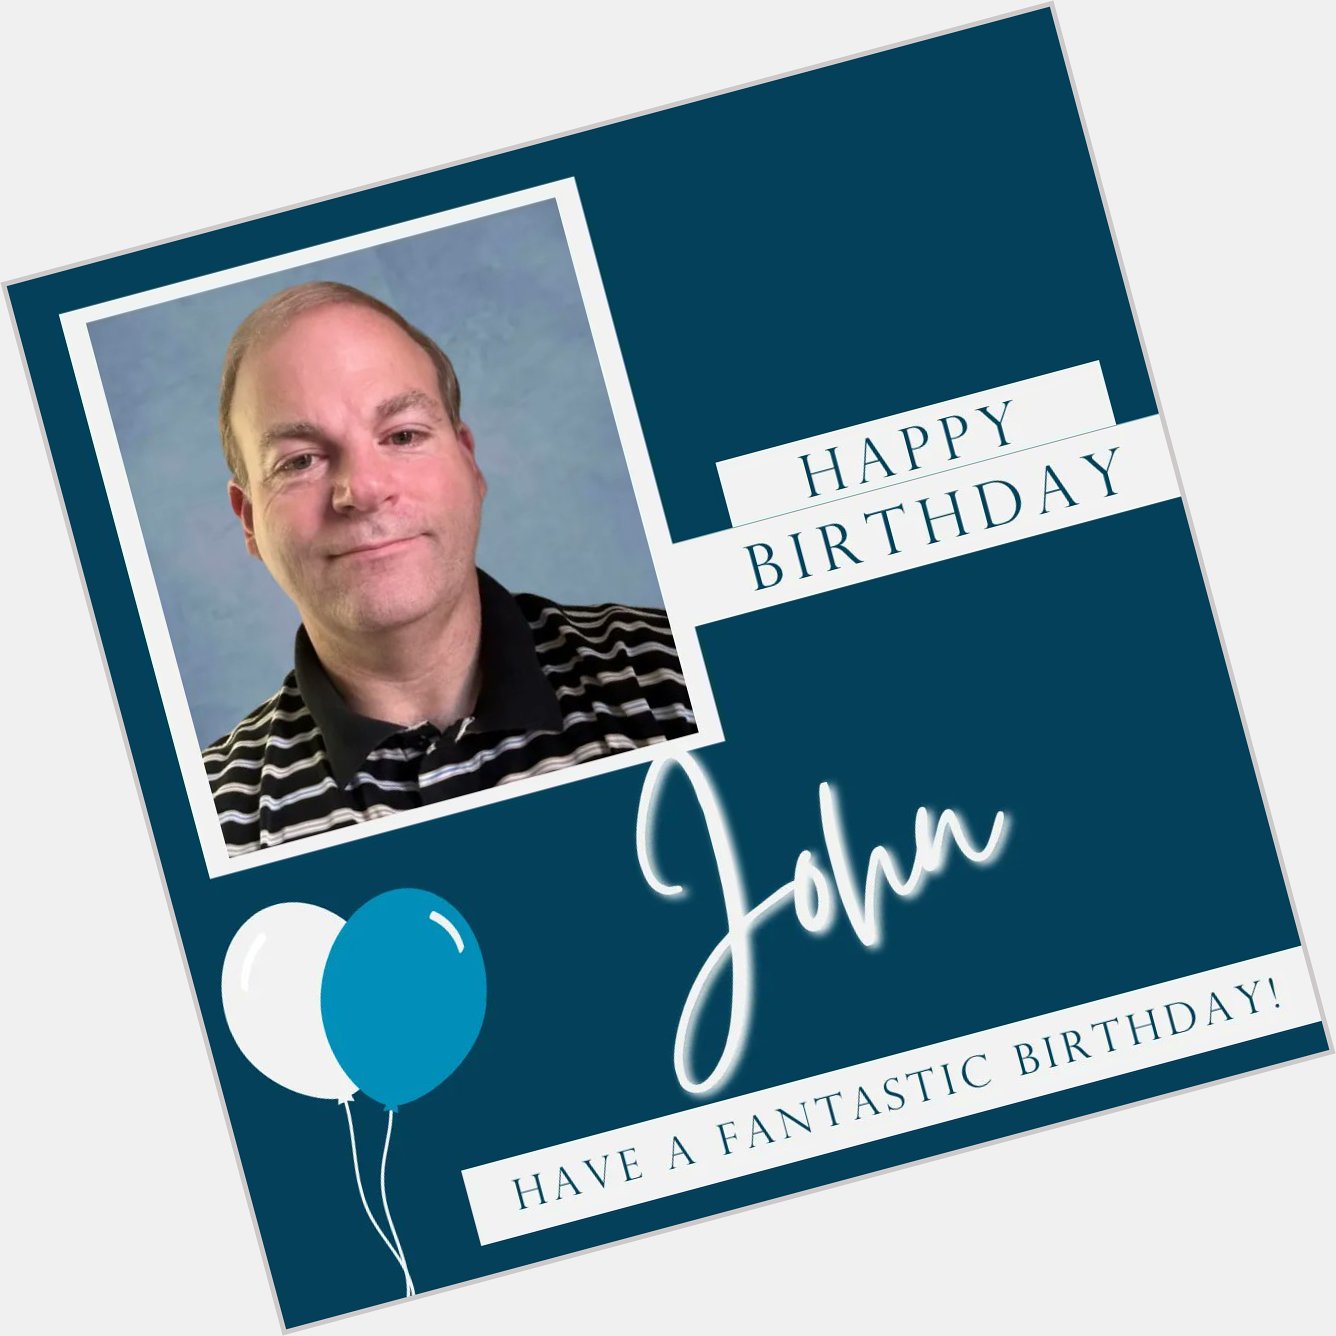 Happy Birthday to one of our awesome Inspectors, John Lee! We hope you have the best day! 